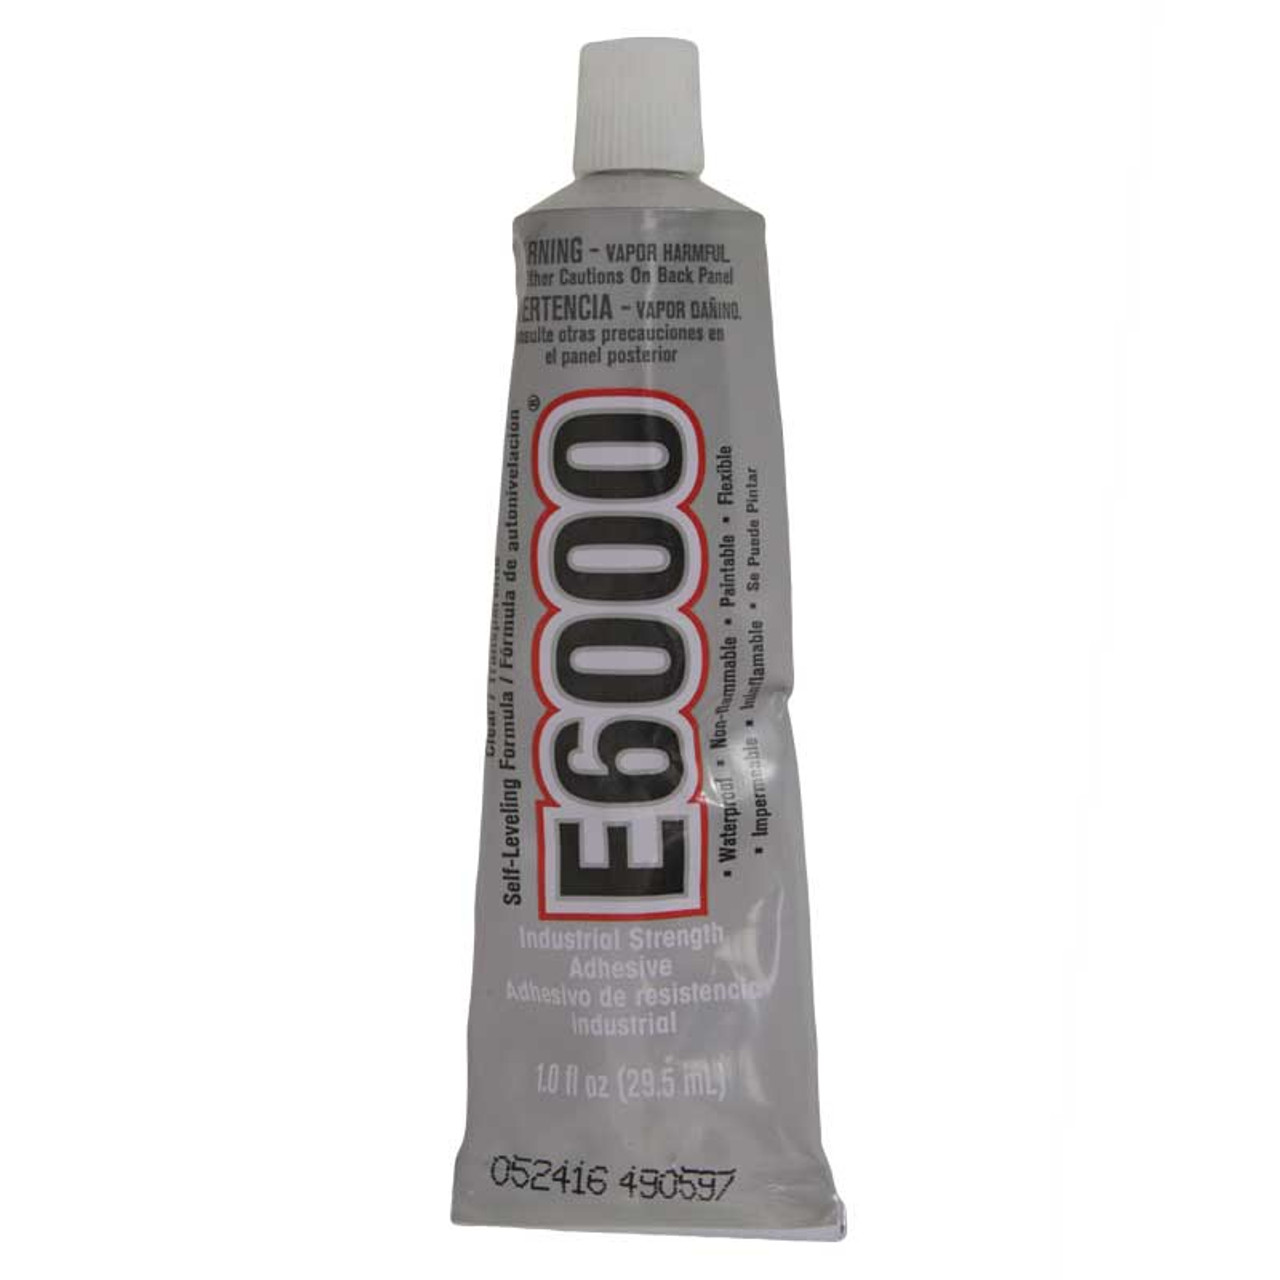 E 6000 Adhesive Jewelry and Watch Clear Glue 1 oz. | Esslinger